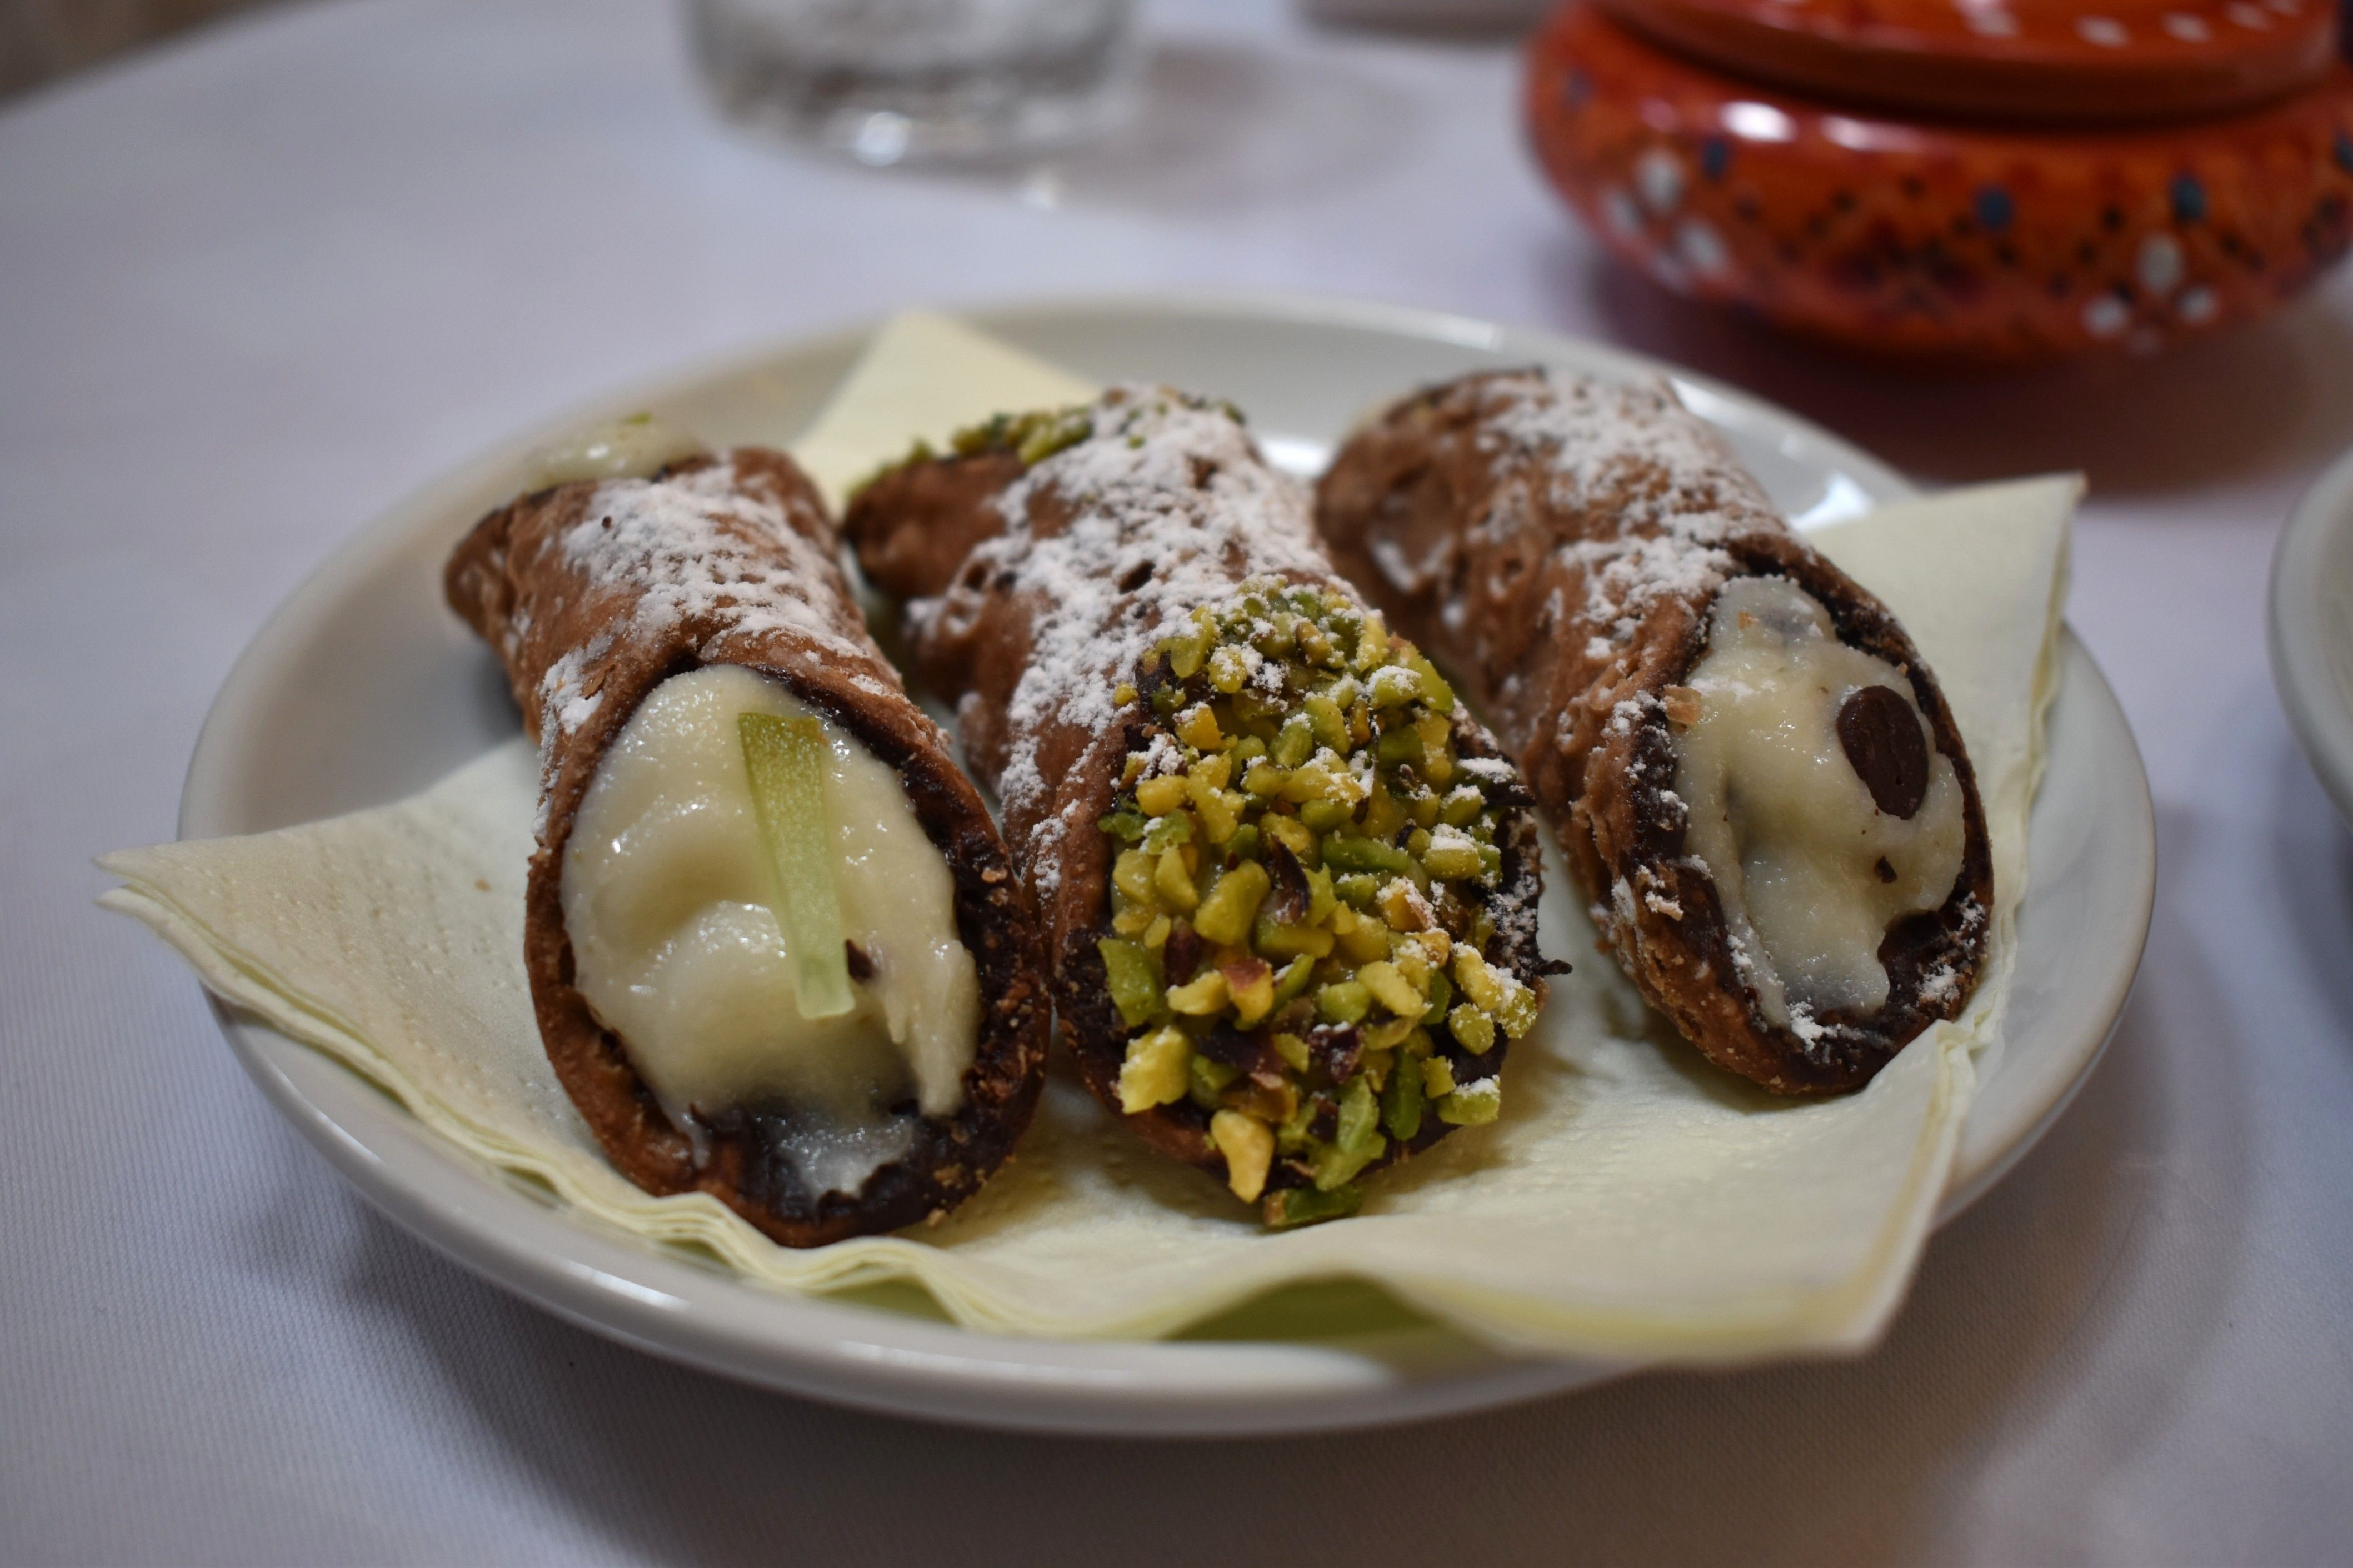 Caption: A photo of three cannoli pastries with ricotta cream, pistachio, and lemon, placed on a napkin in a small plate. (Local Guide @MoniDi)